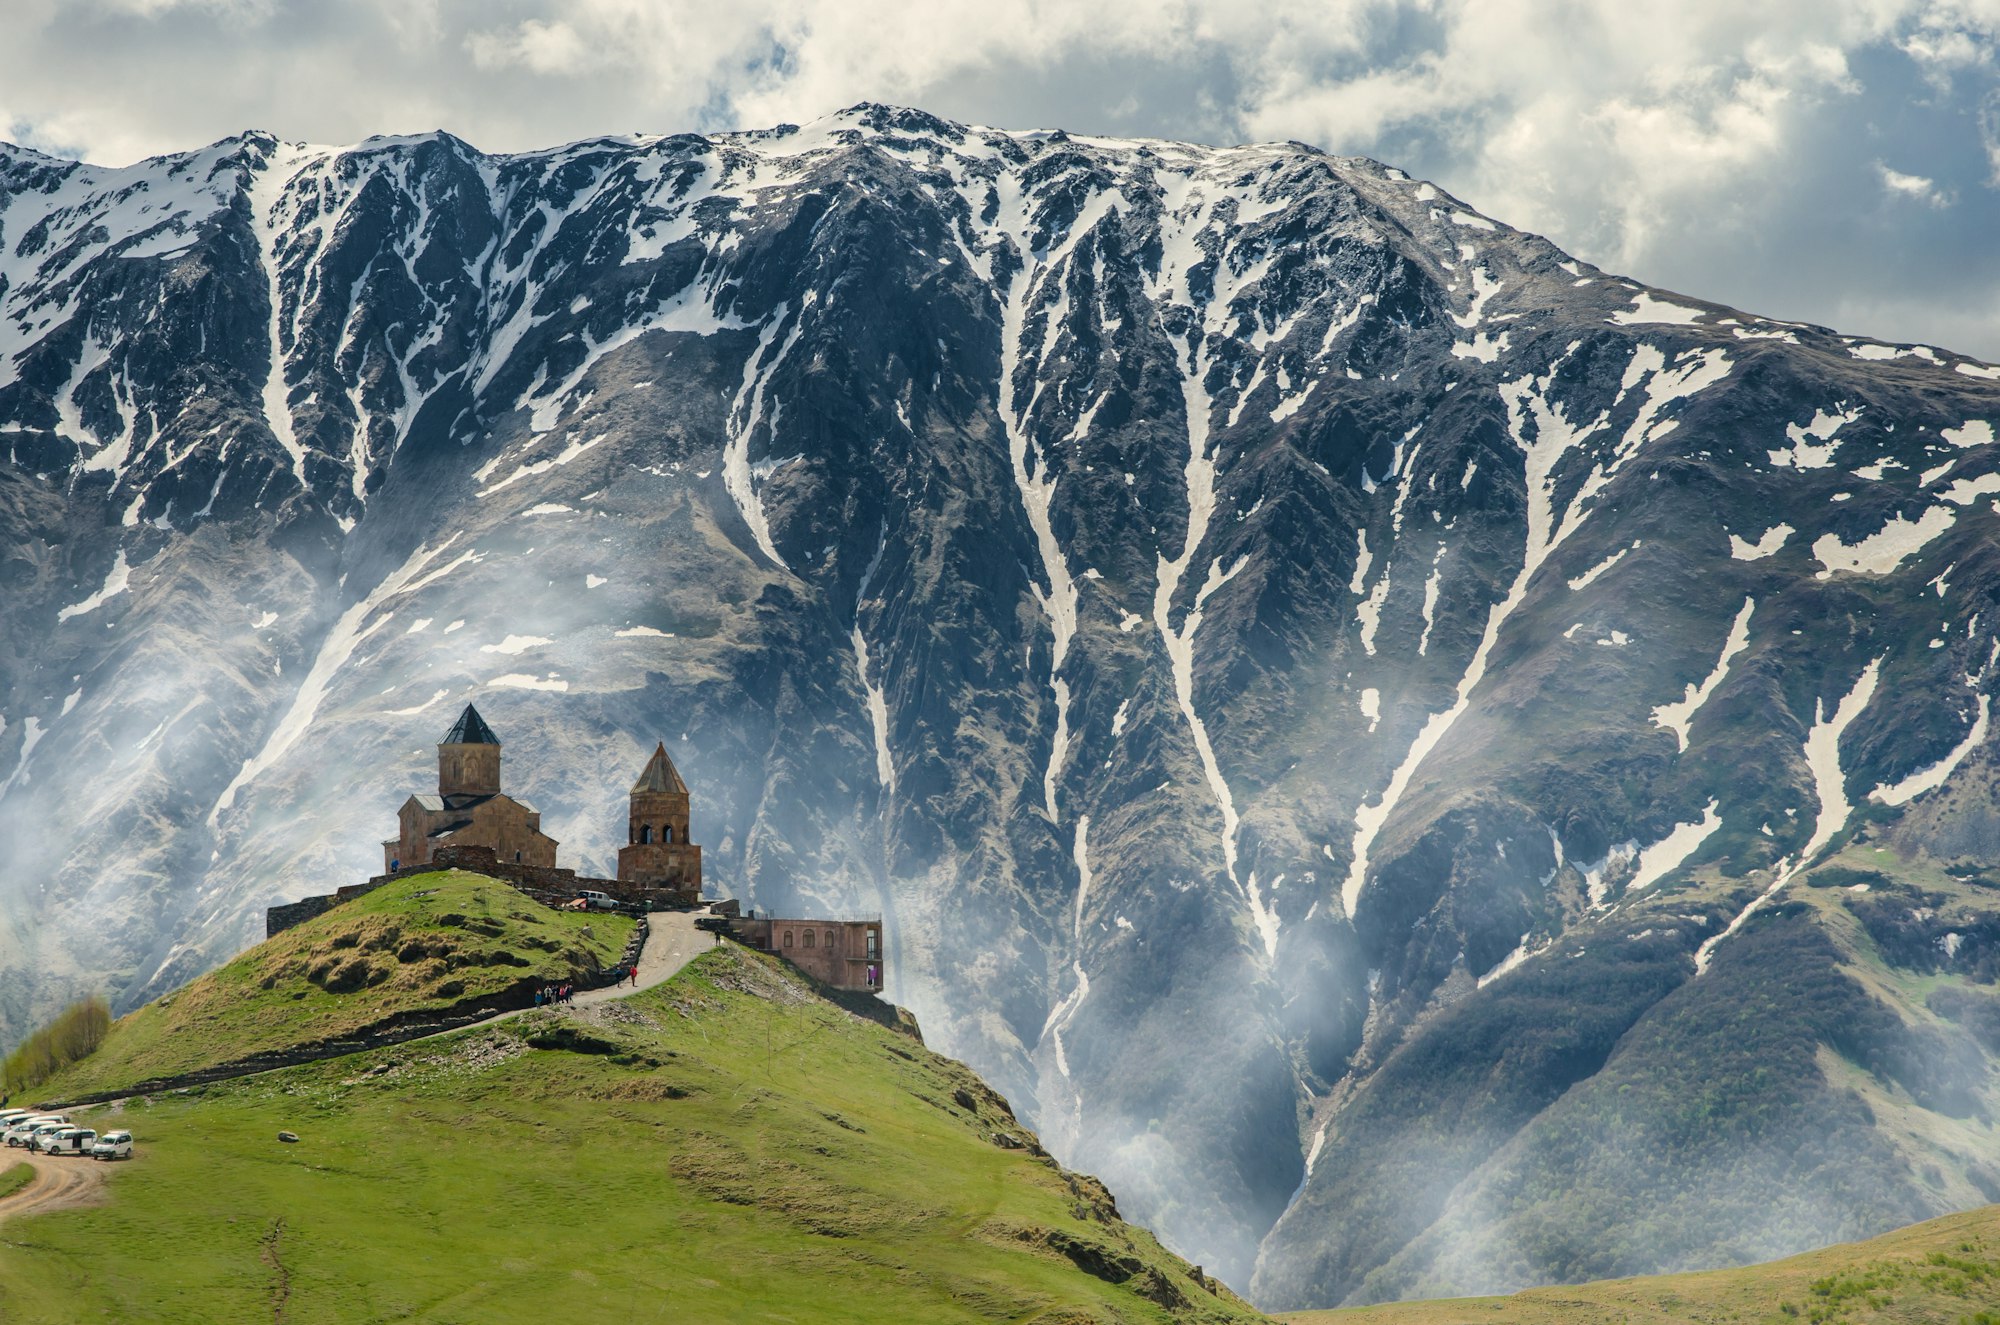 Trinity Gergeti Church, Kazbegi, Georgia
This is my favorite photo. If you want to share it on Instagram, I would appreciate if you mention my account @imangm